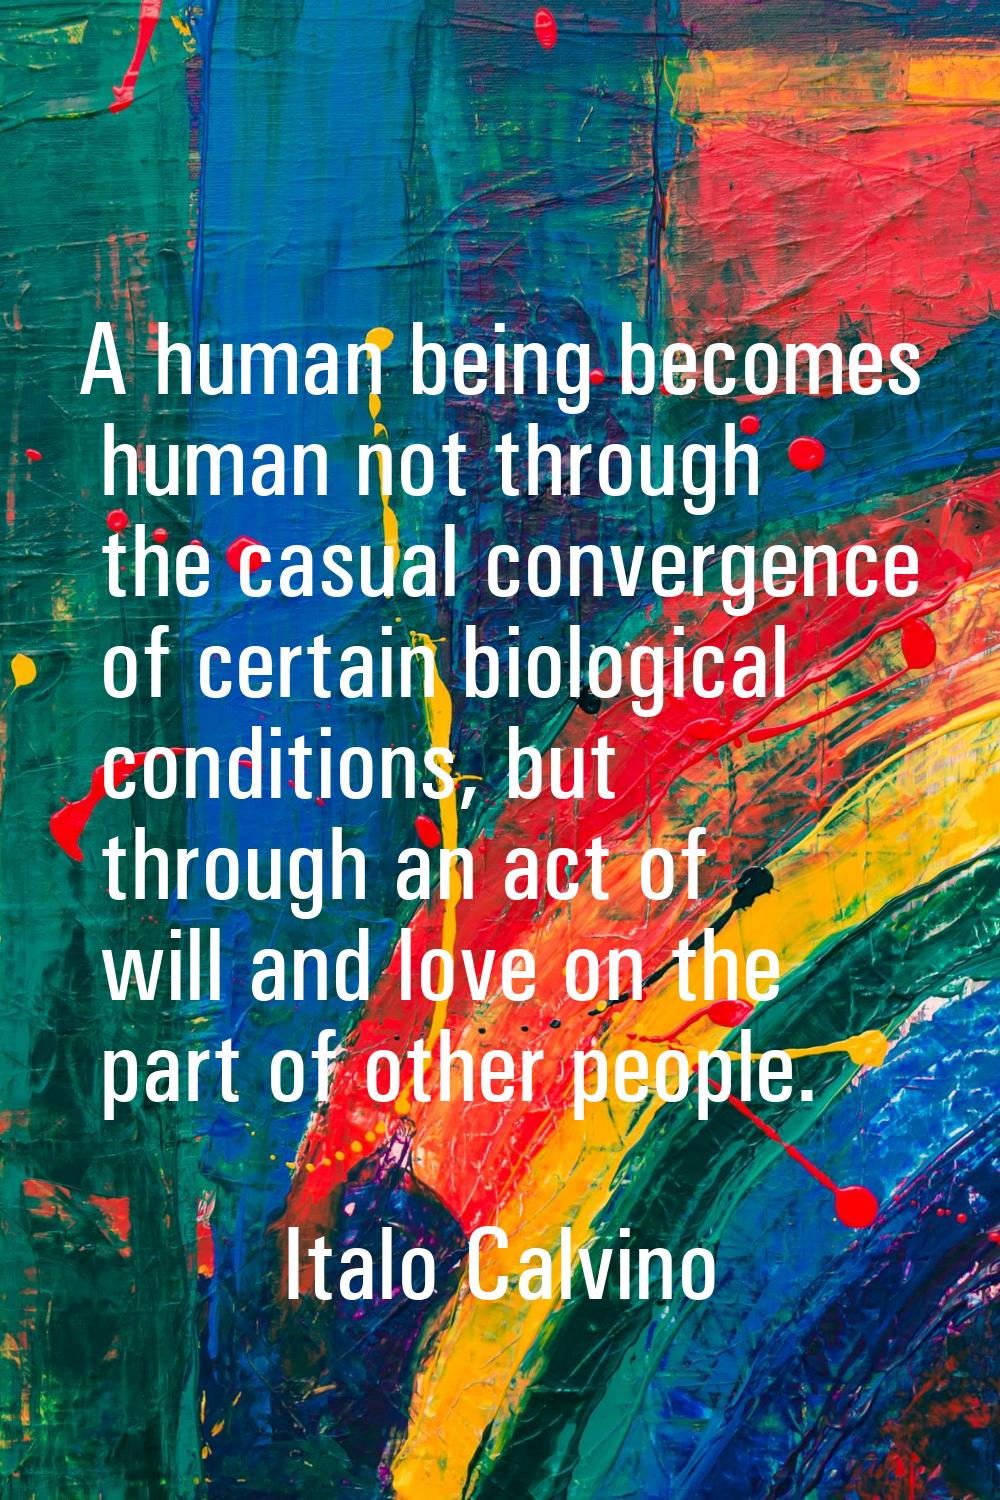 A human being becomes human not through the casual convergence of certain biological conditions, bu